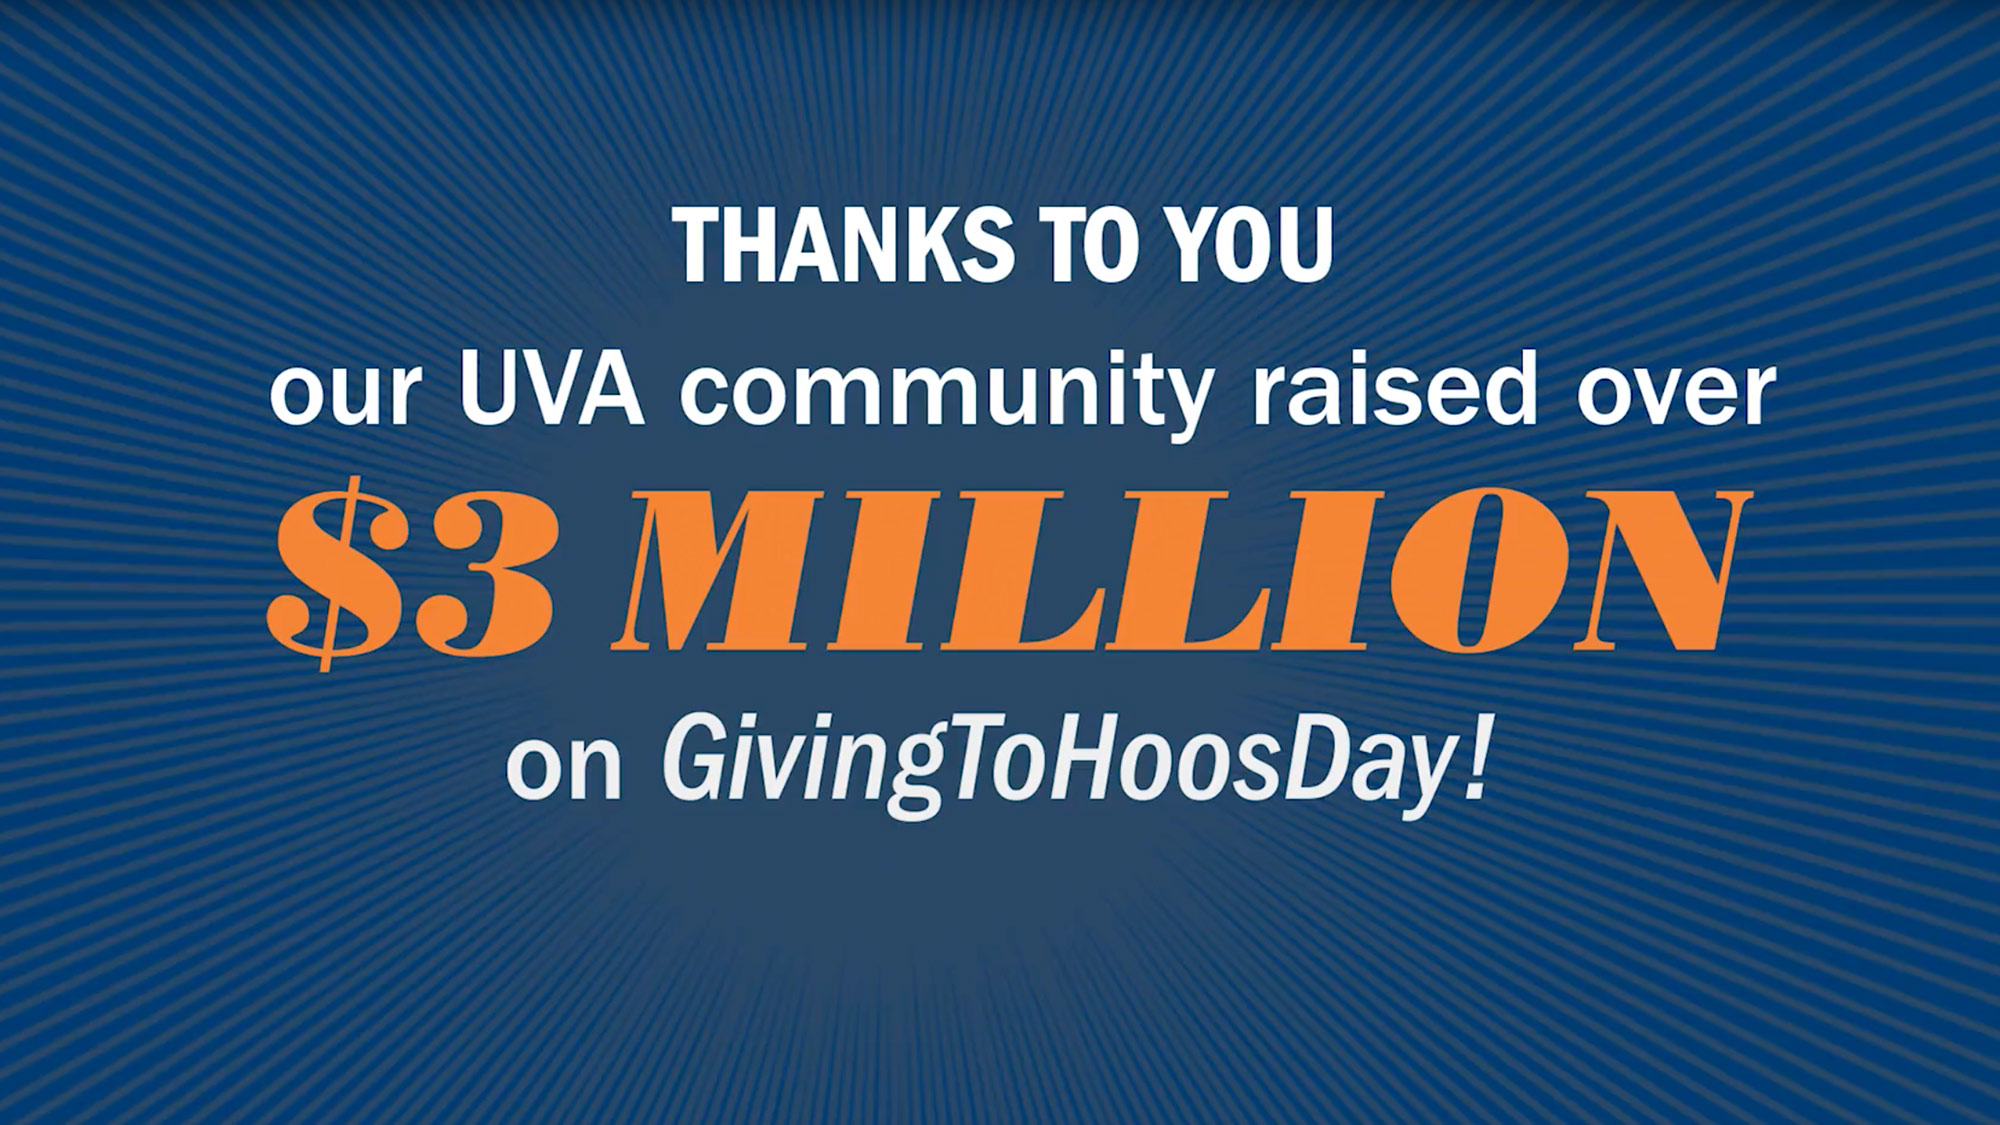 text reads: Thanks to you out UVA community raised over $3 million on GivingToHoosDay!